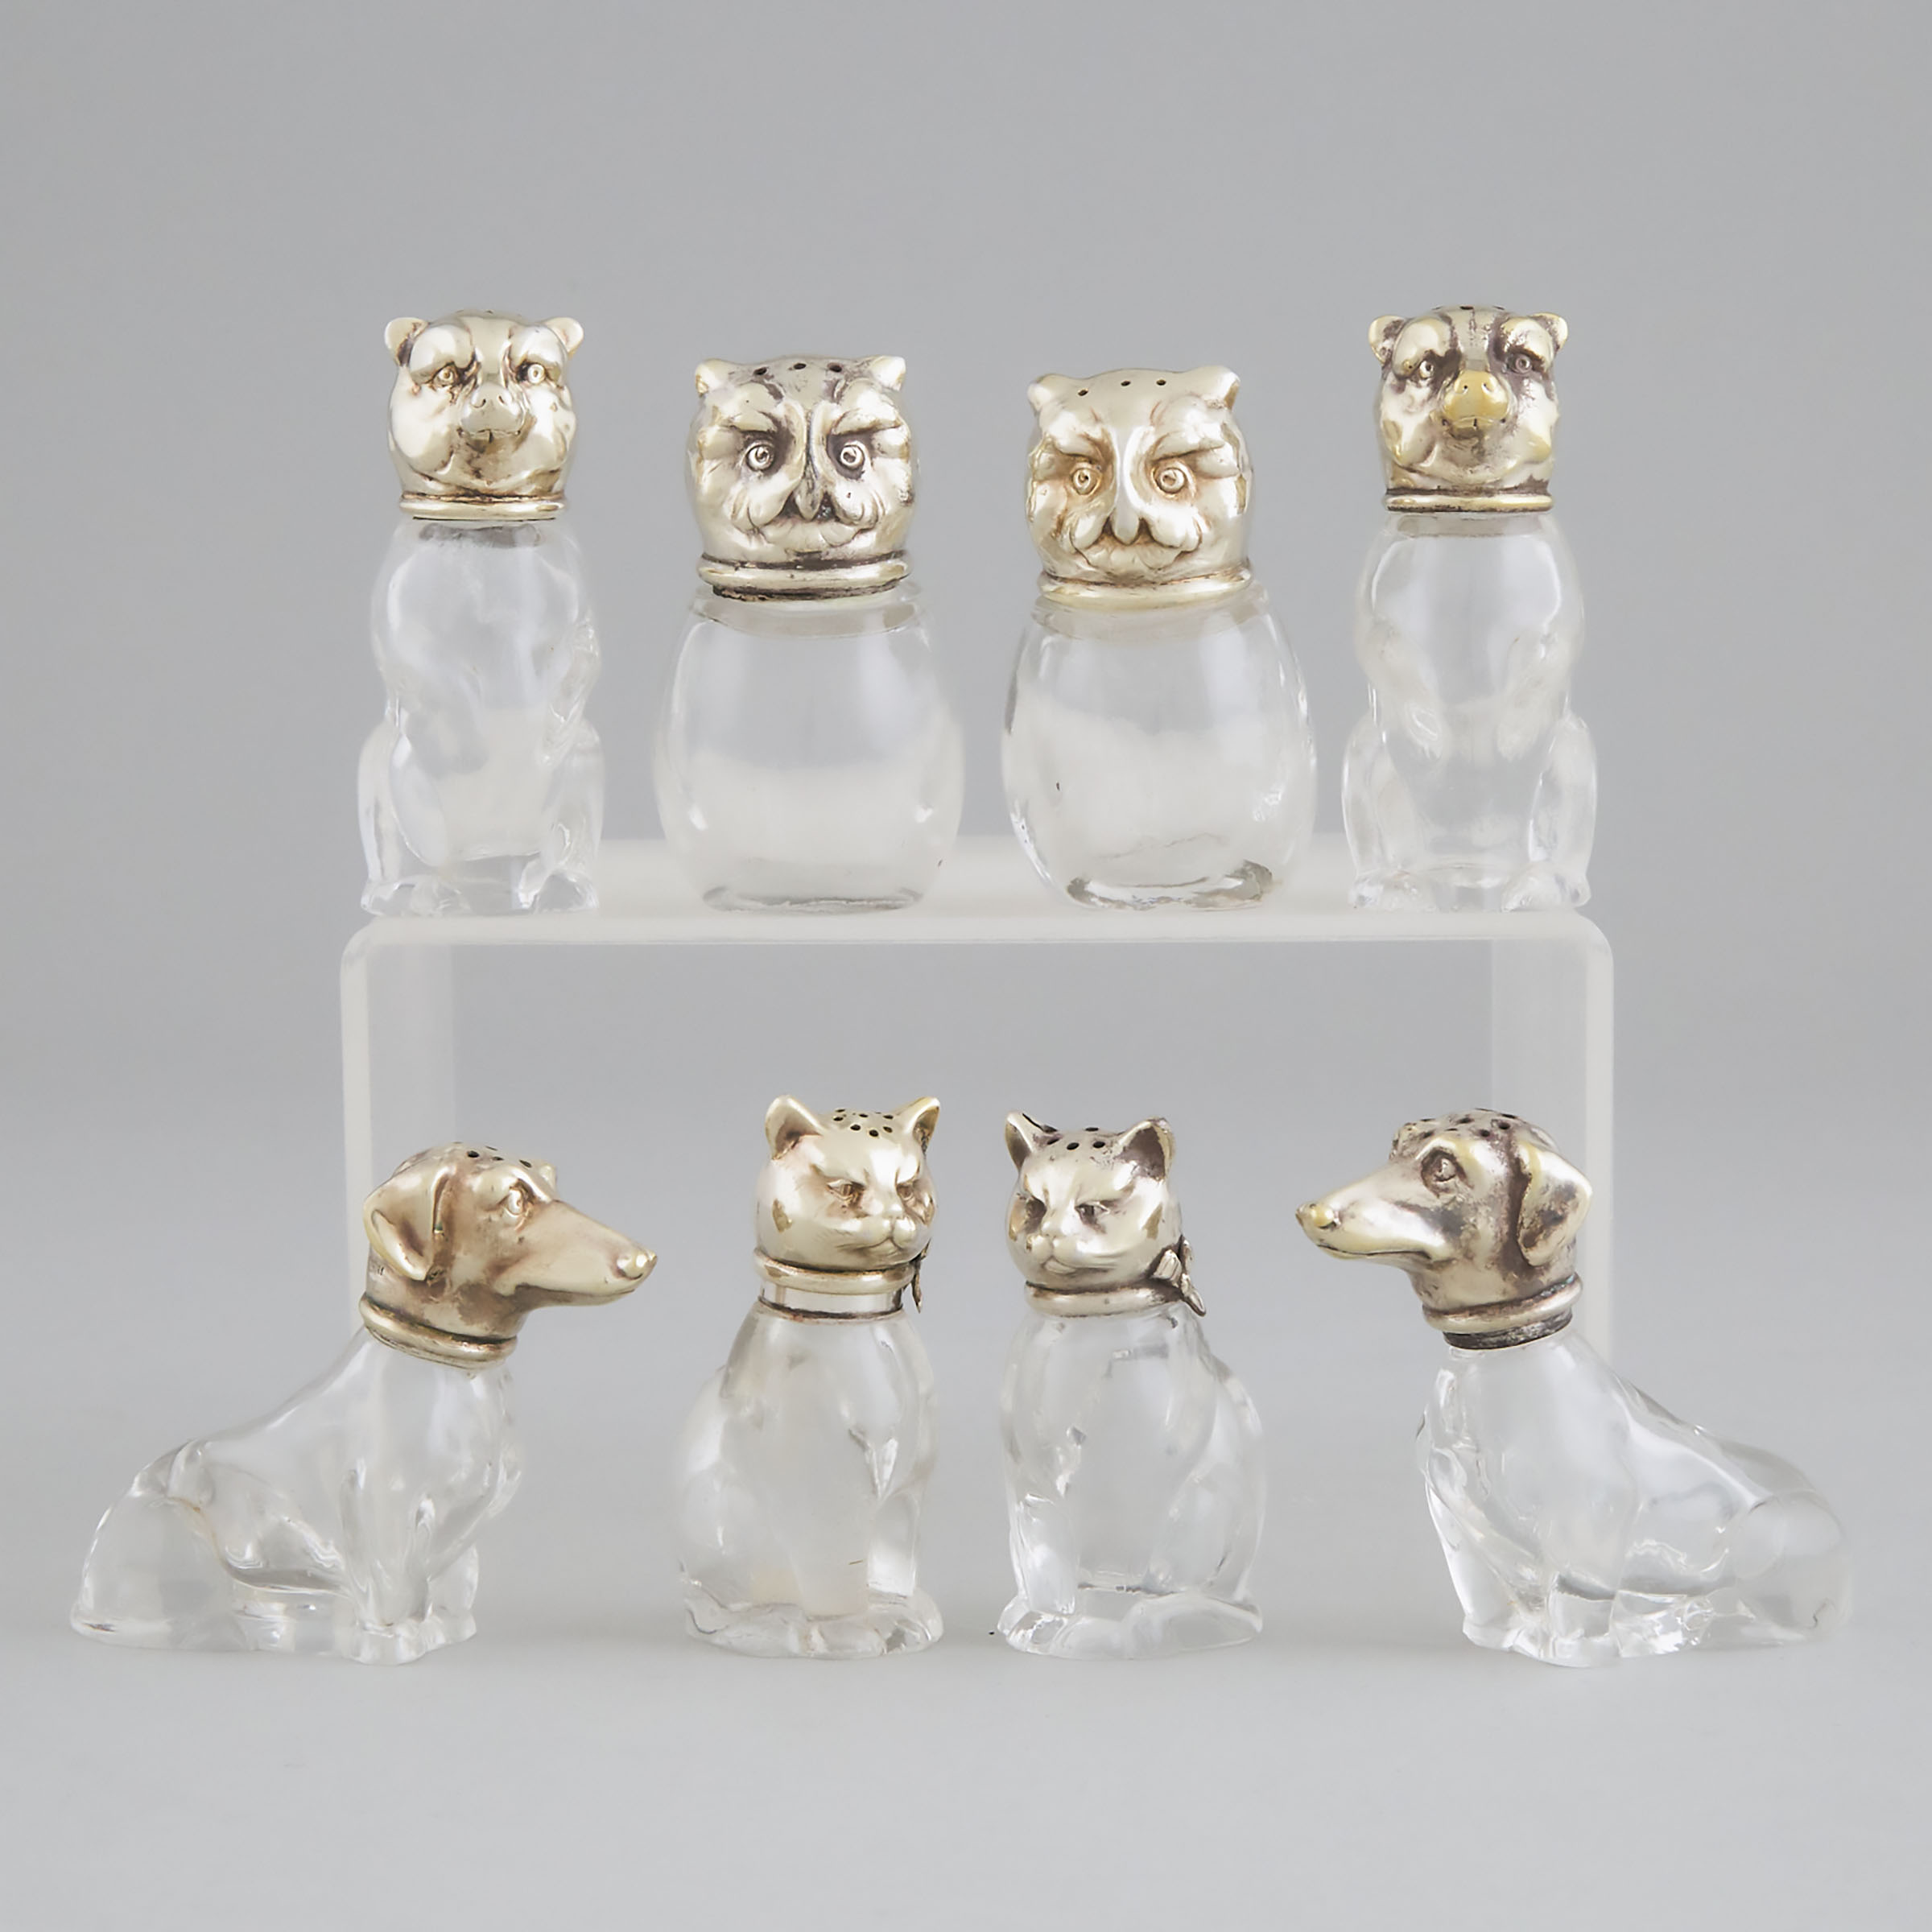 Eight German Silver Mounted Glass Novelty Salt and Pepper Casters, 20th century